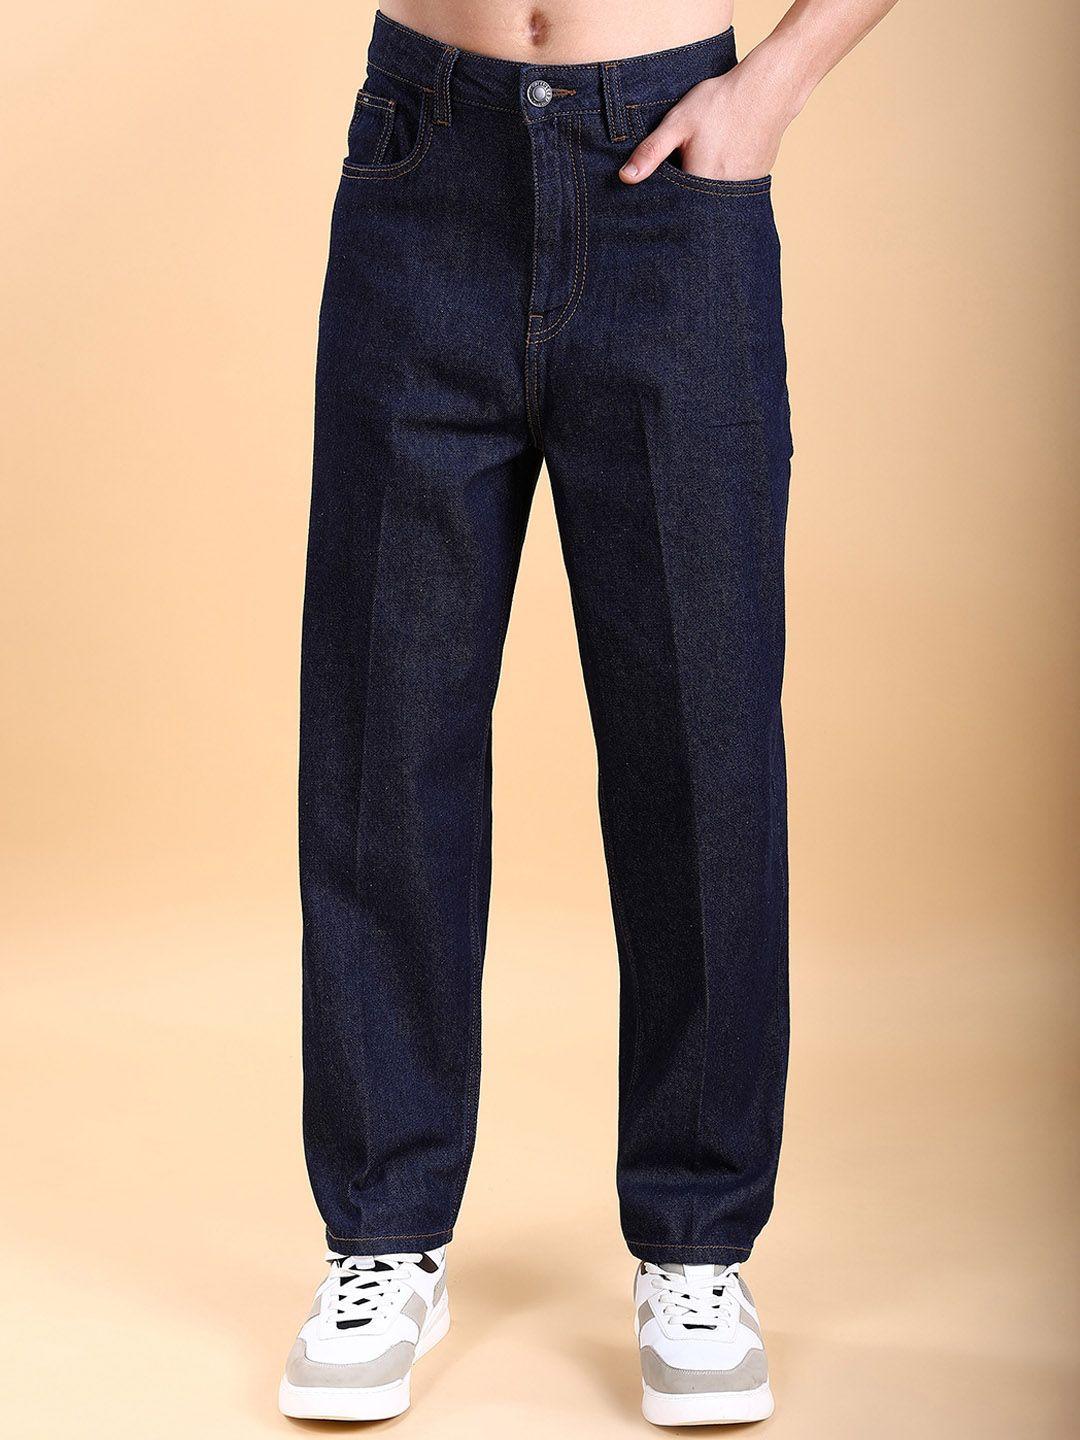 highlander-men-relaxed-fit-mid-rise-jeans